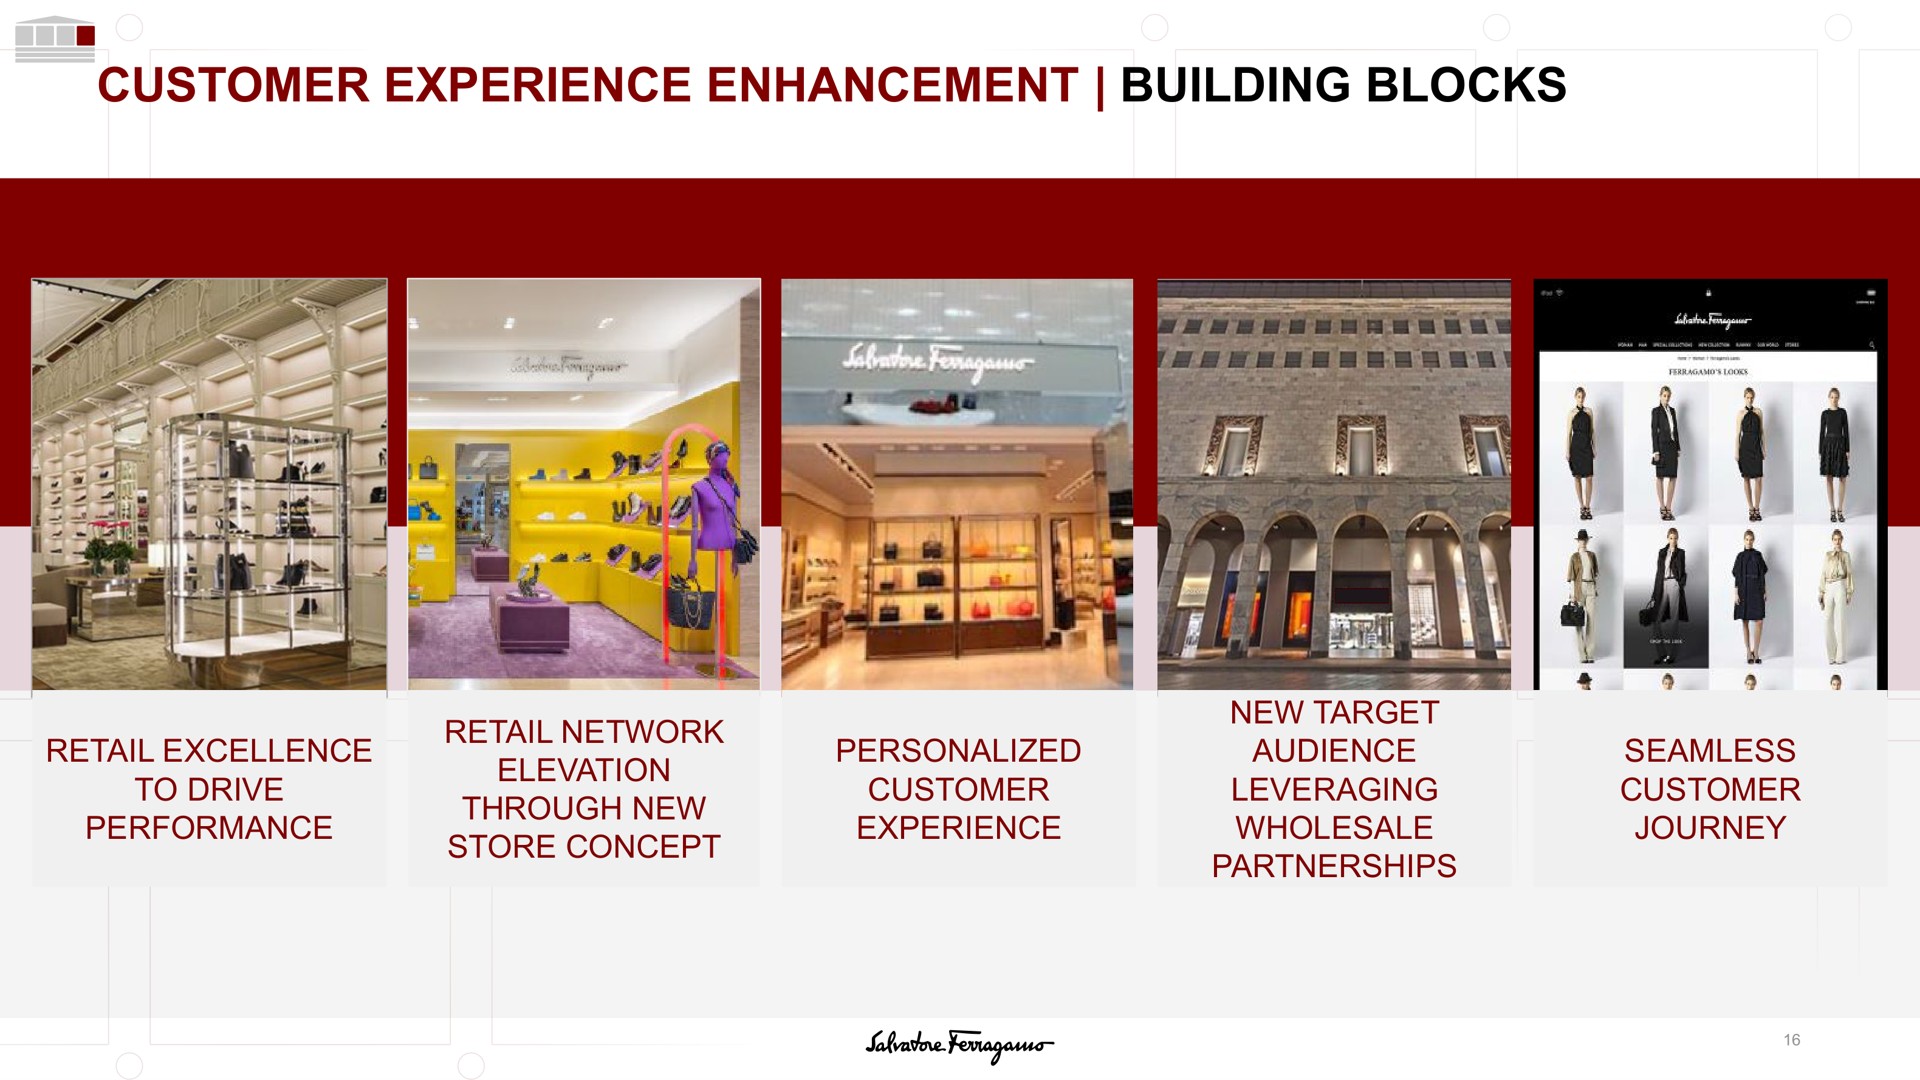 customer experience enhancement building blocks retail excellence to drive performance sea through new store concept personalized new target audience leveraging wholesale seamless journey | Salvatore Ferragamo